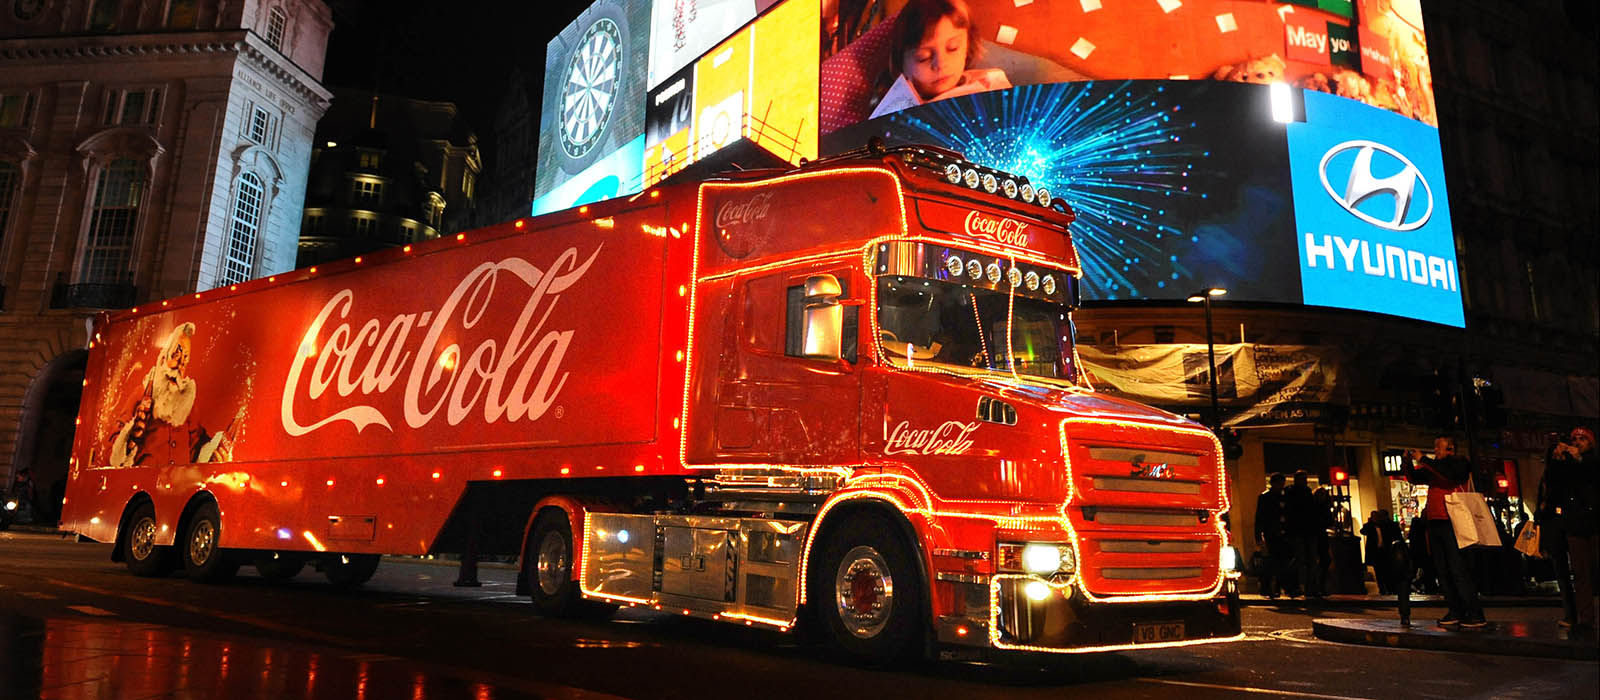 Coca-Cola Christmas truck in Piccadilly Circus